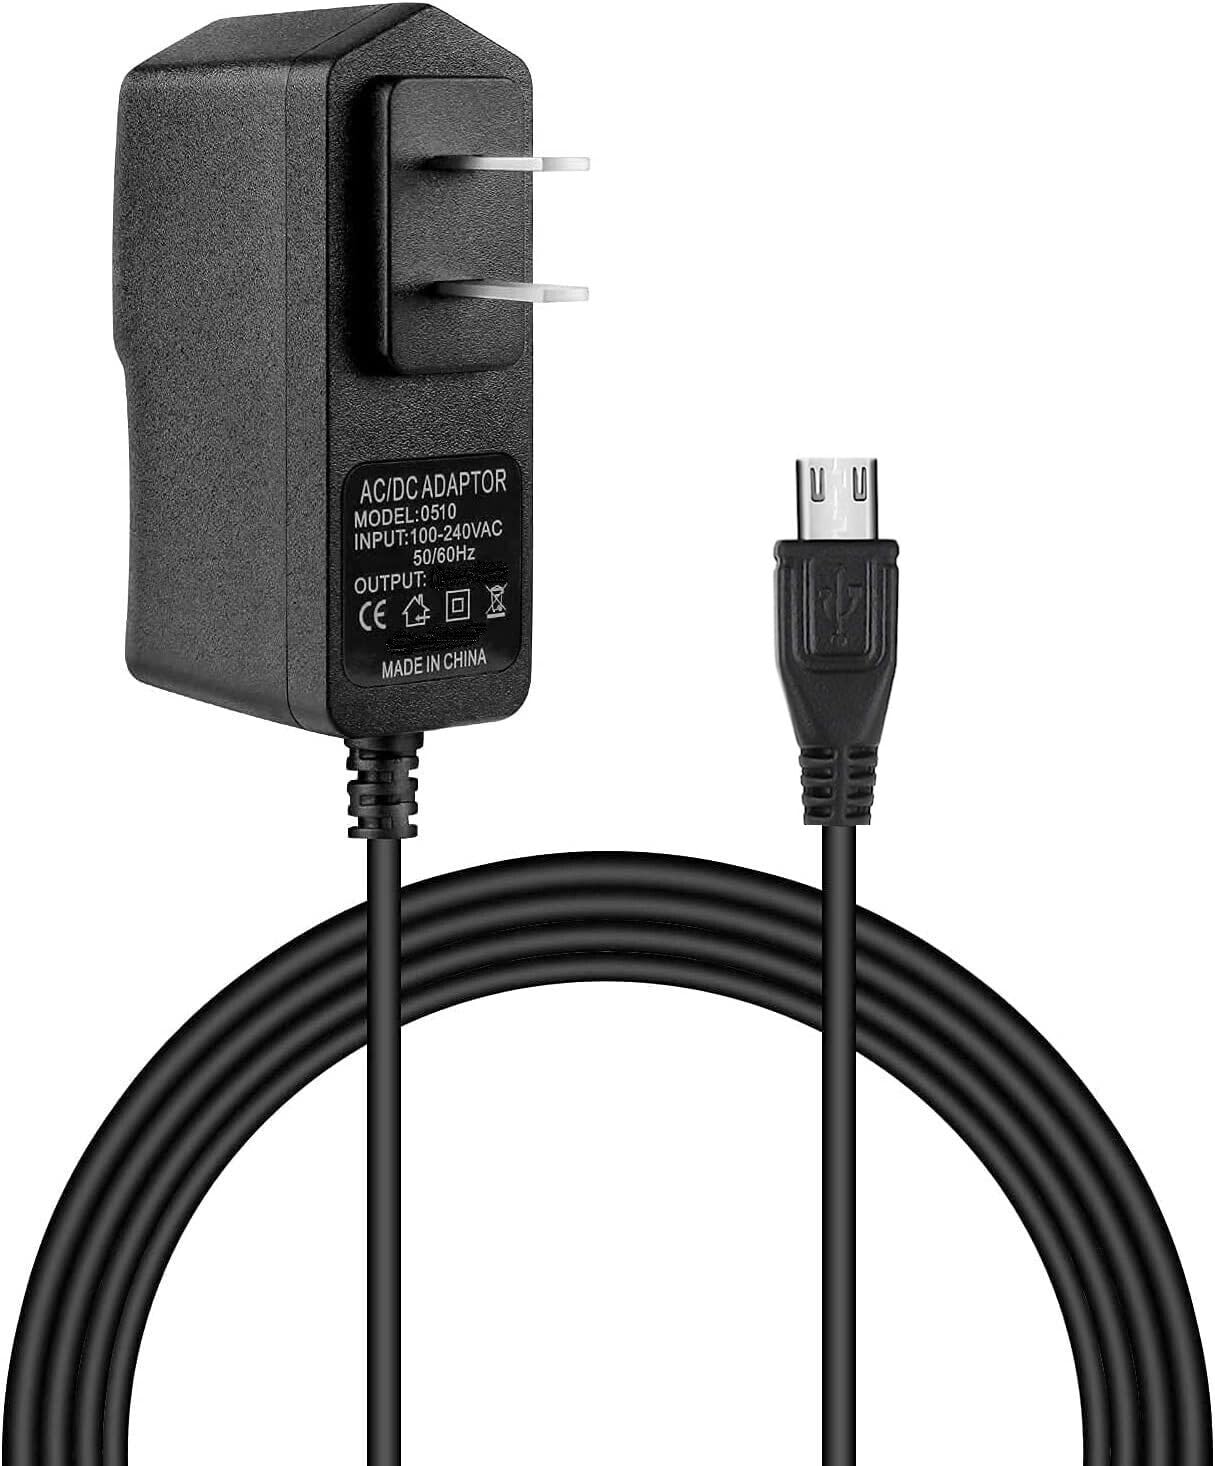 Xzrucst AC/DC Adapter Charger Cord for Uniden Bearcat BC75XLT BC-75XLT Handheld Scanner